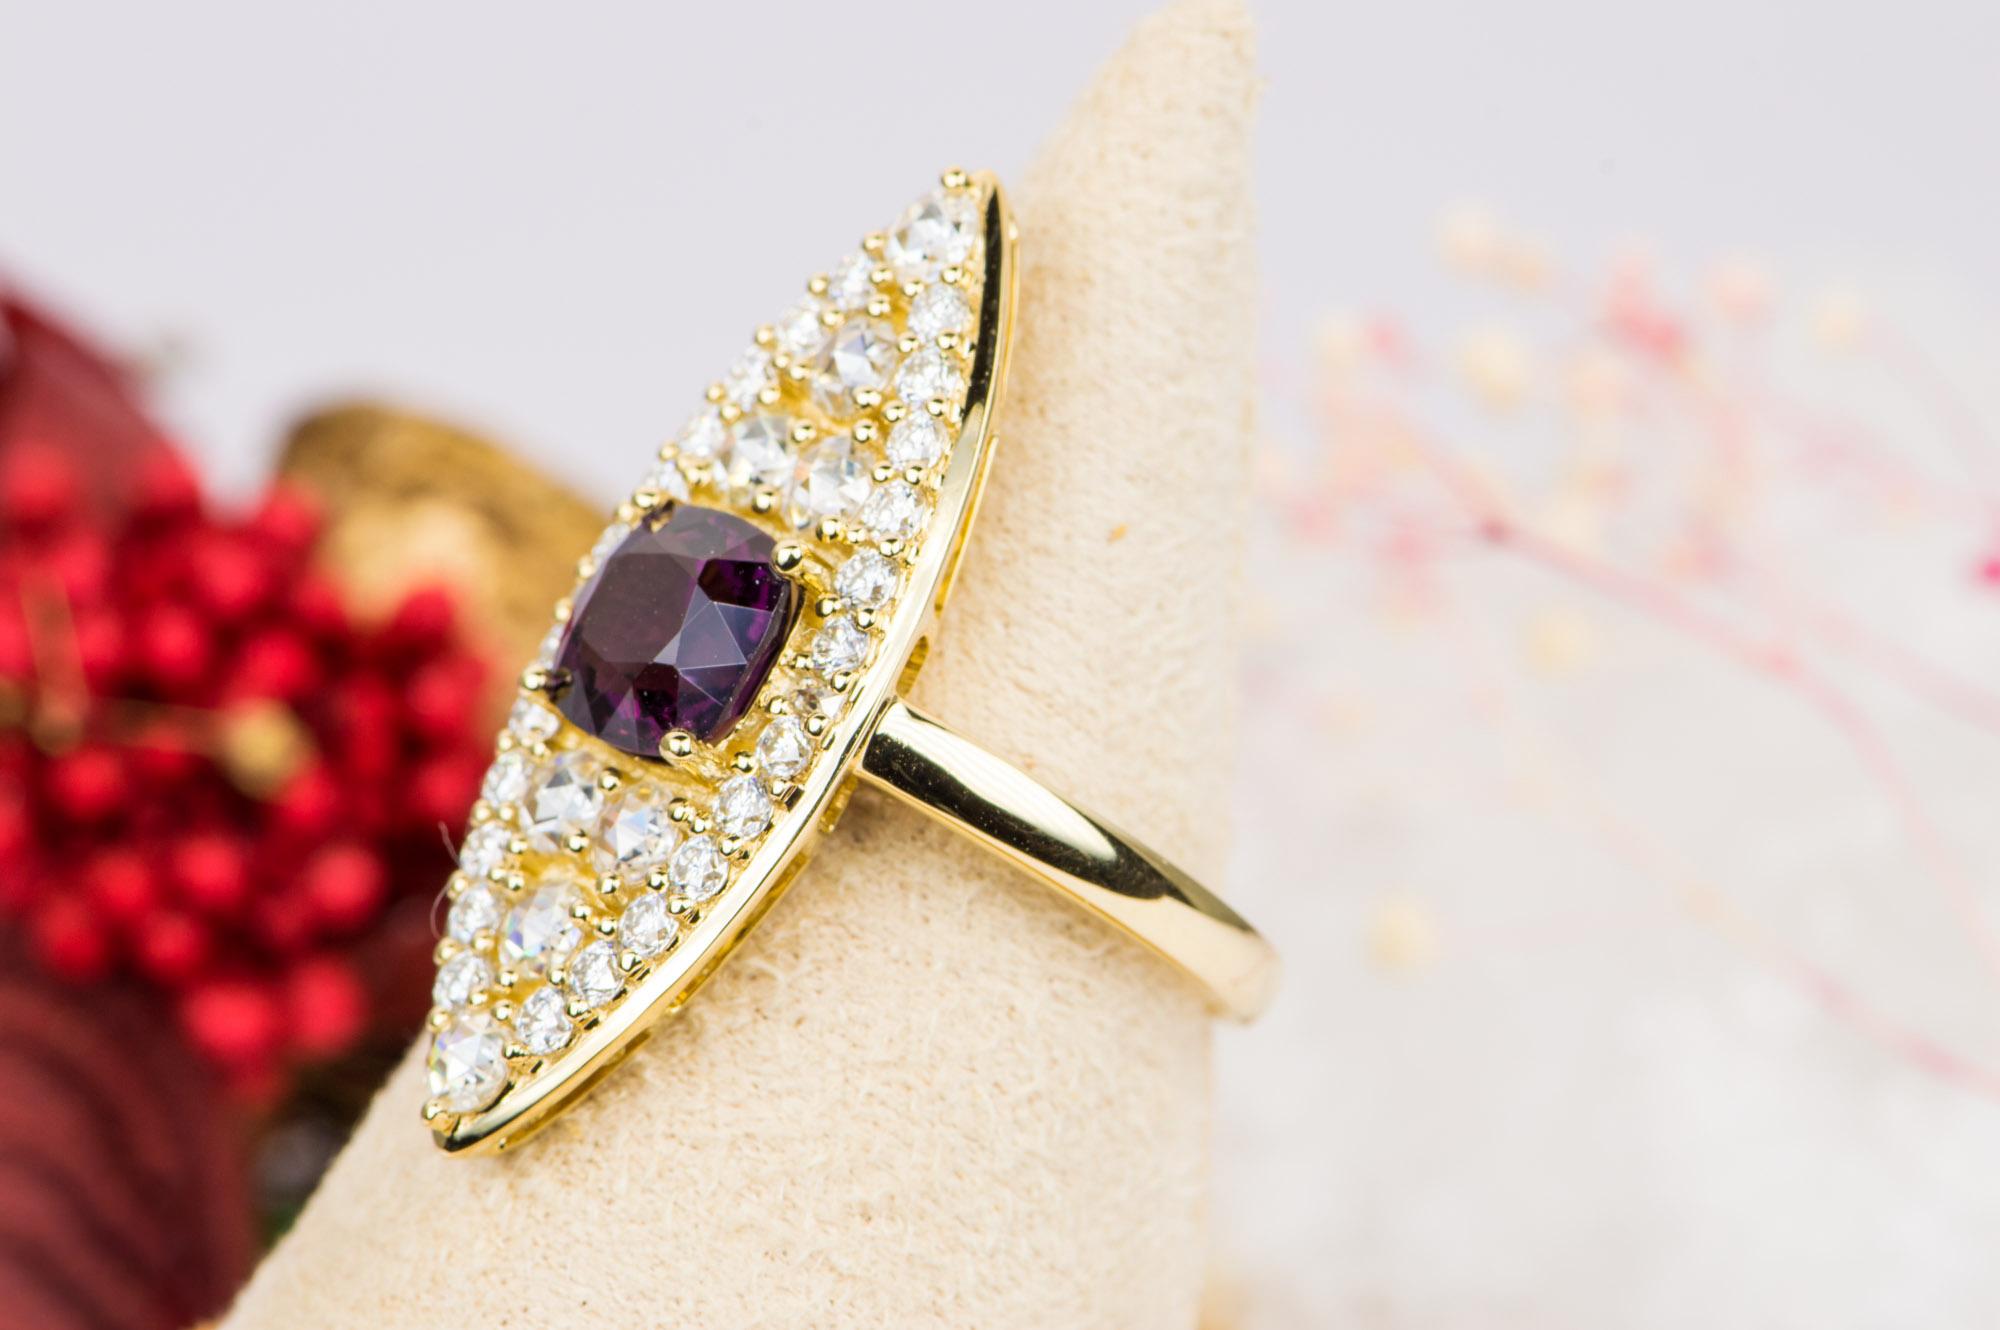 Cushion Cut 2.02ct Royal Purple Spinel 14k Gold Navette Ring Elongated French Cut AD1914